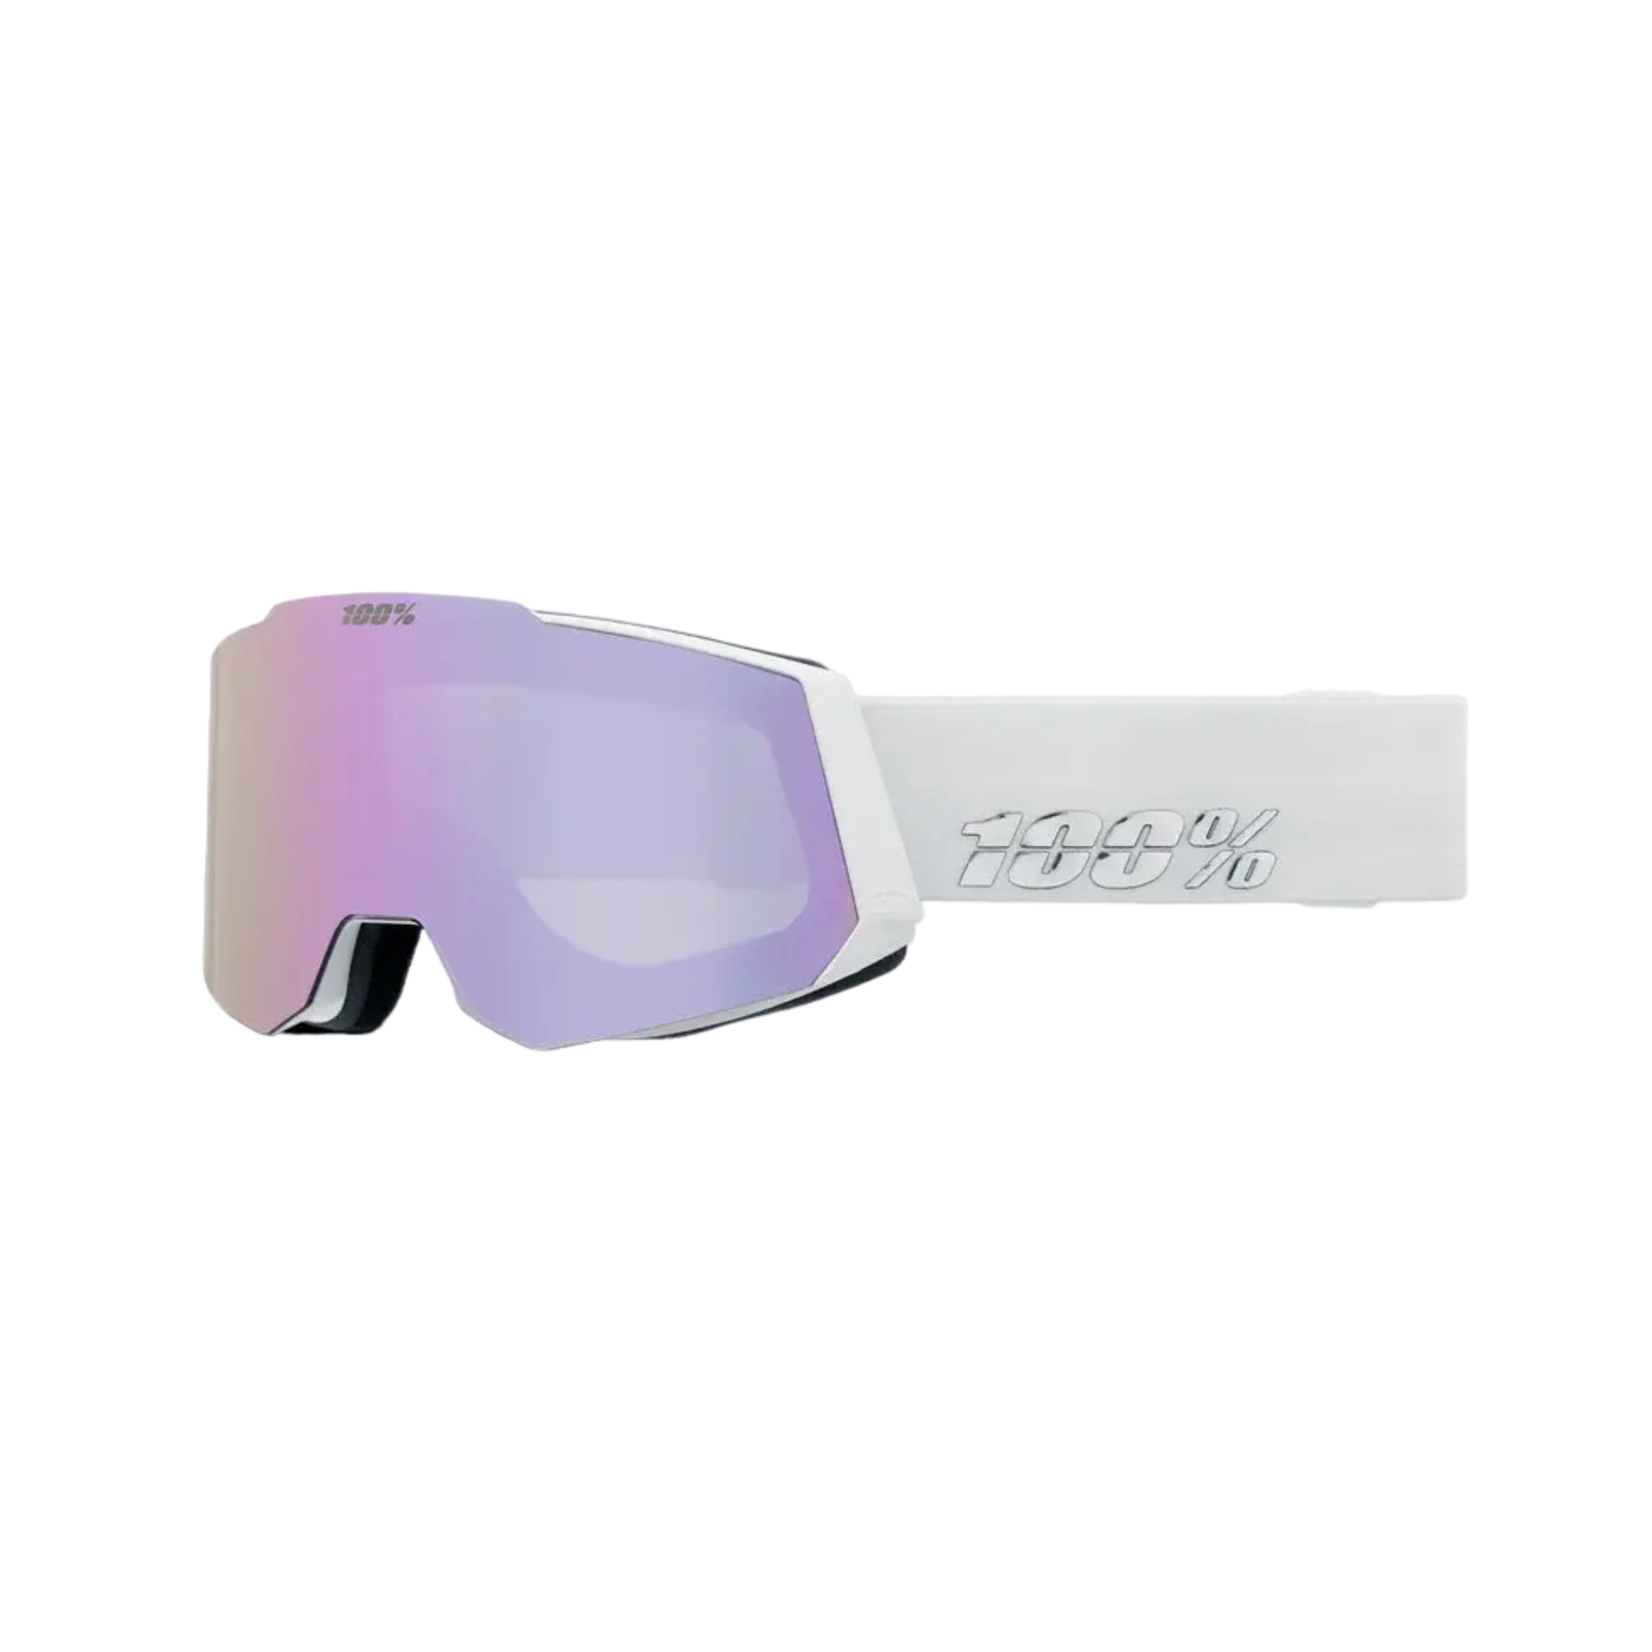 100percent 100% Snowcraft Goggle - White/Lavender and Turquoise Lens